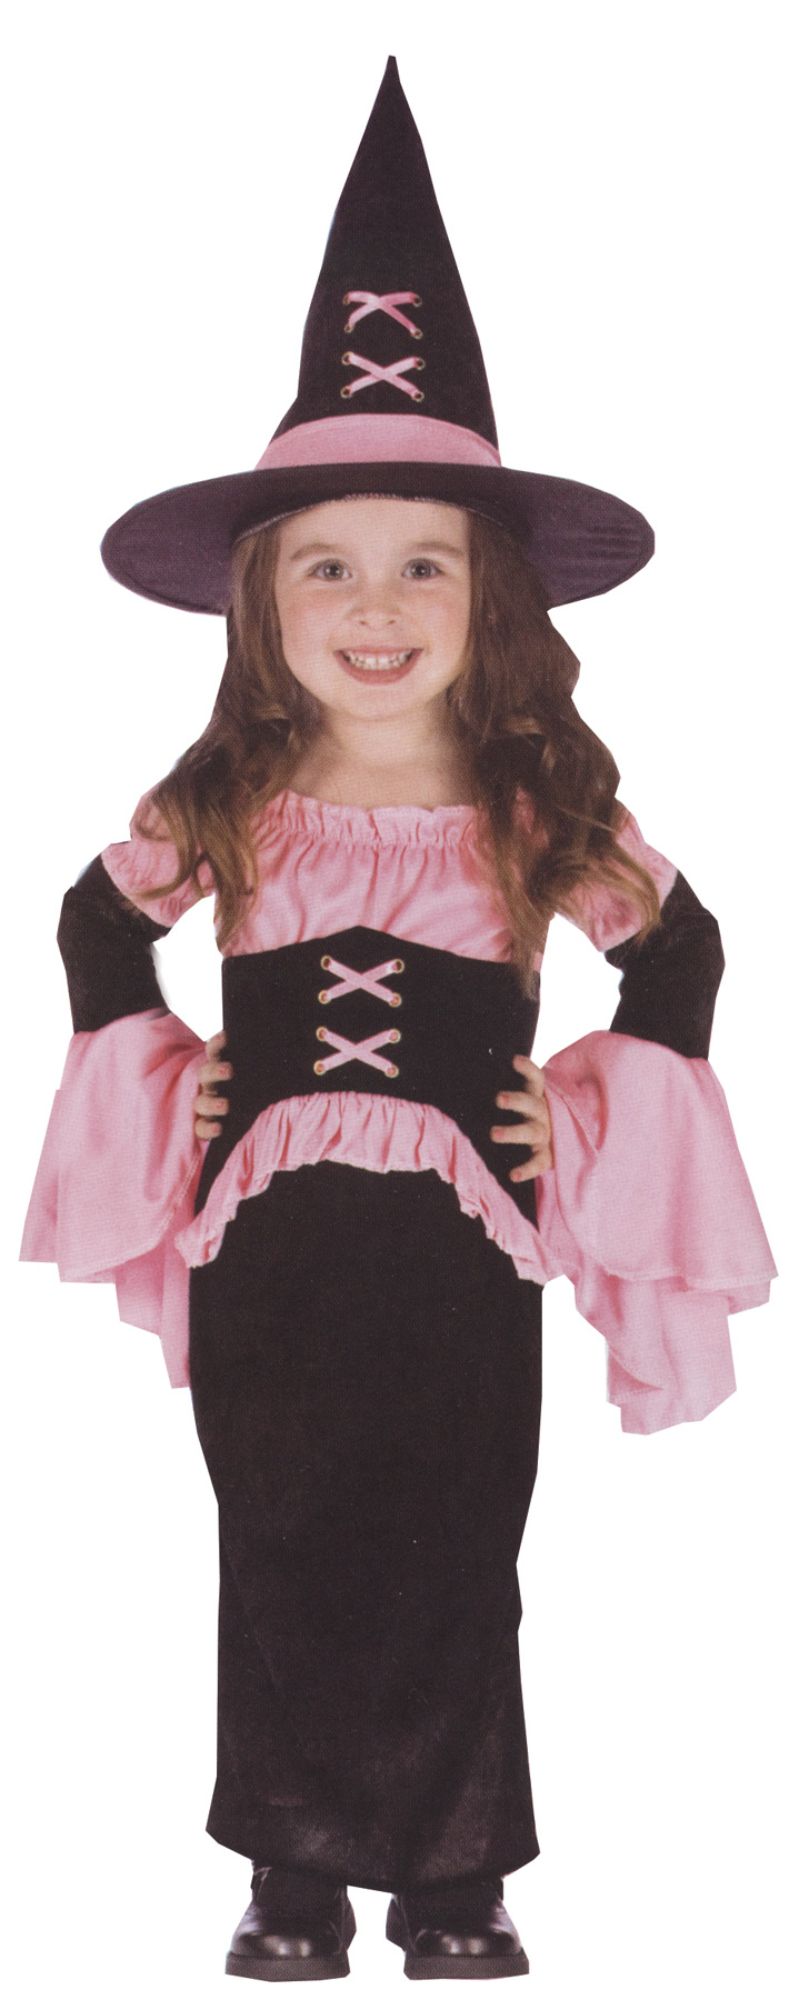 The Costume Center Pink and Black Witch Pretty Toddler Halloween Costume - Small